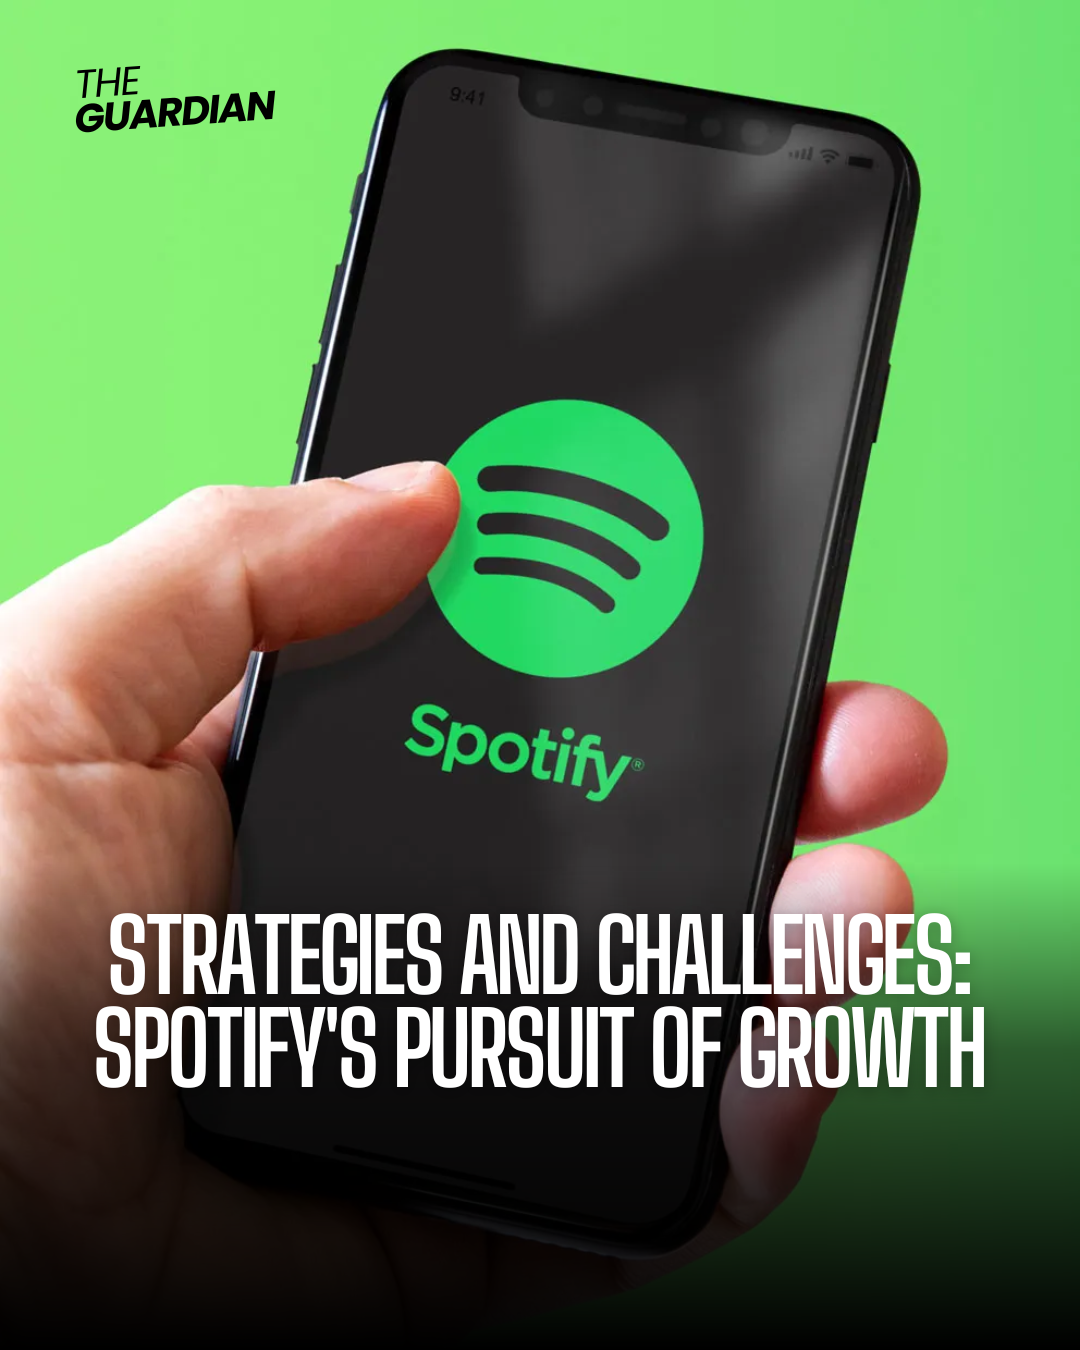 Music streaming firm Spotify has reported record earnings of over €1bn (£860m) after a year of cutting costs and laying off employees.